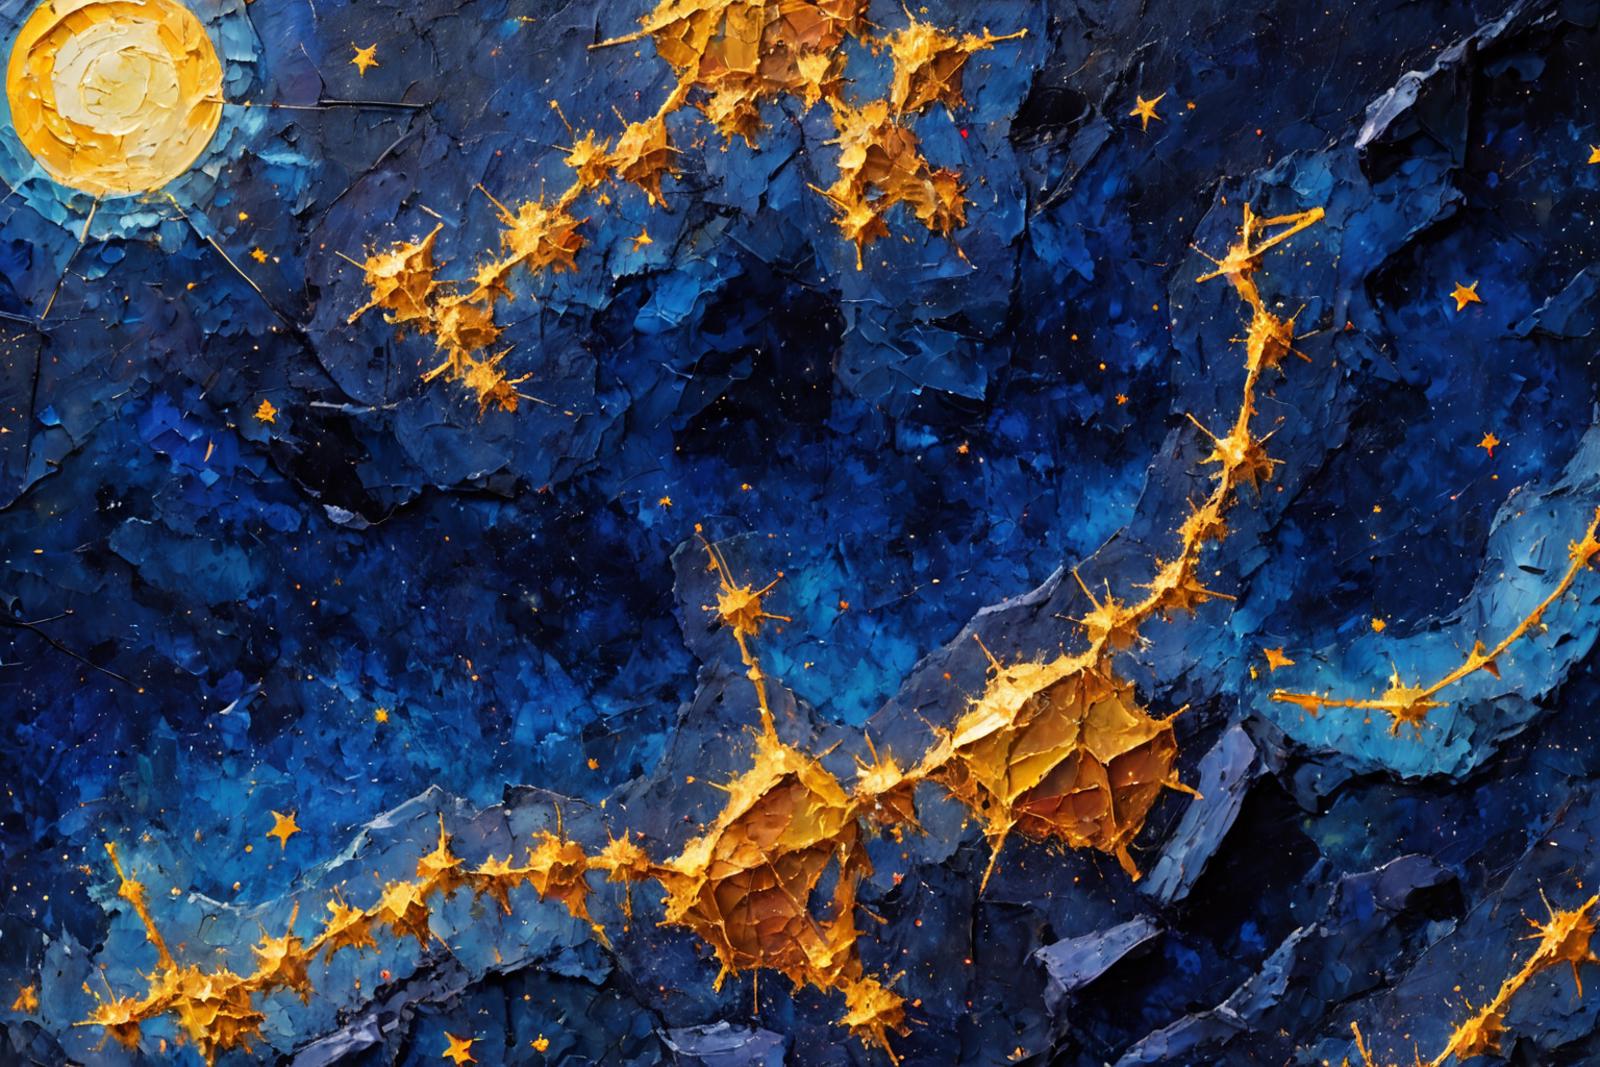 A blue and gold painting with a starry sky and gold starbursts.